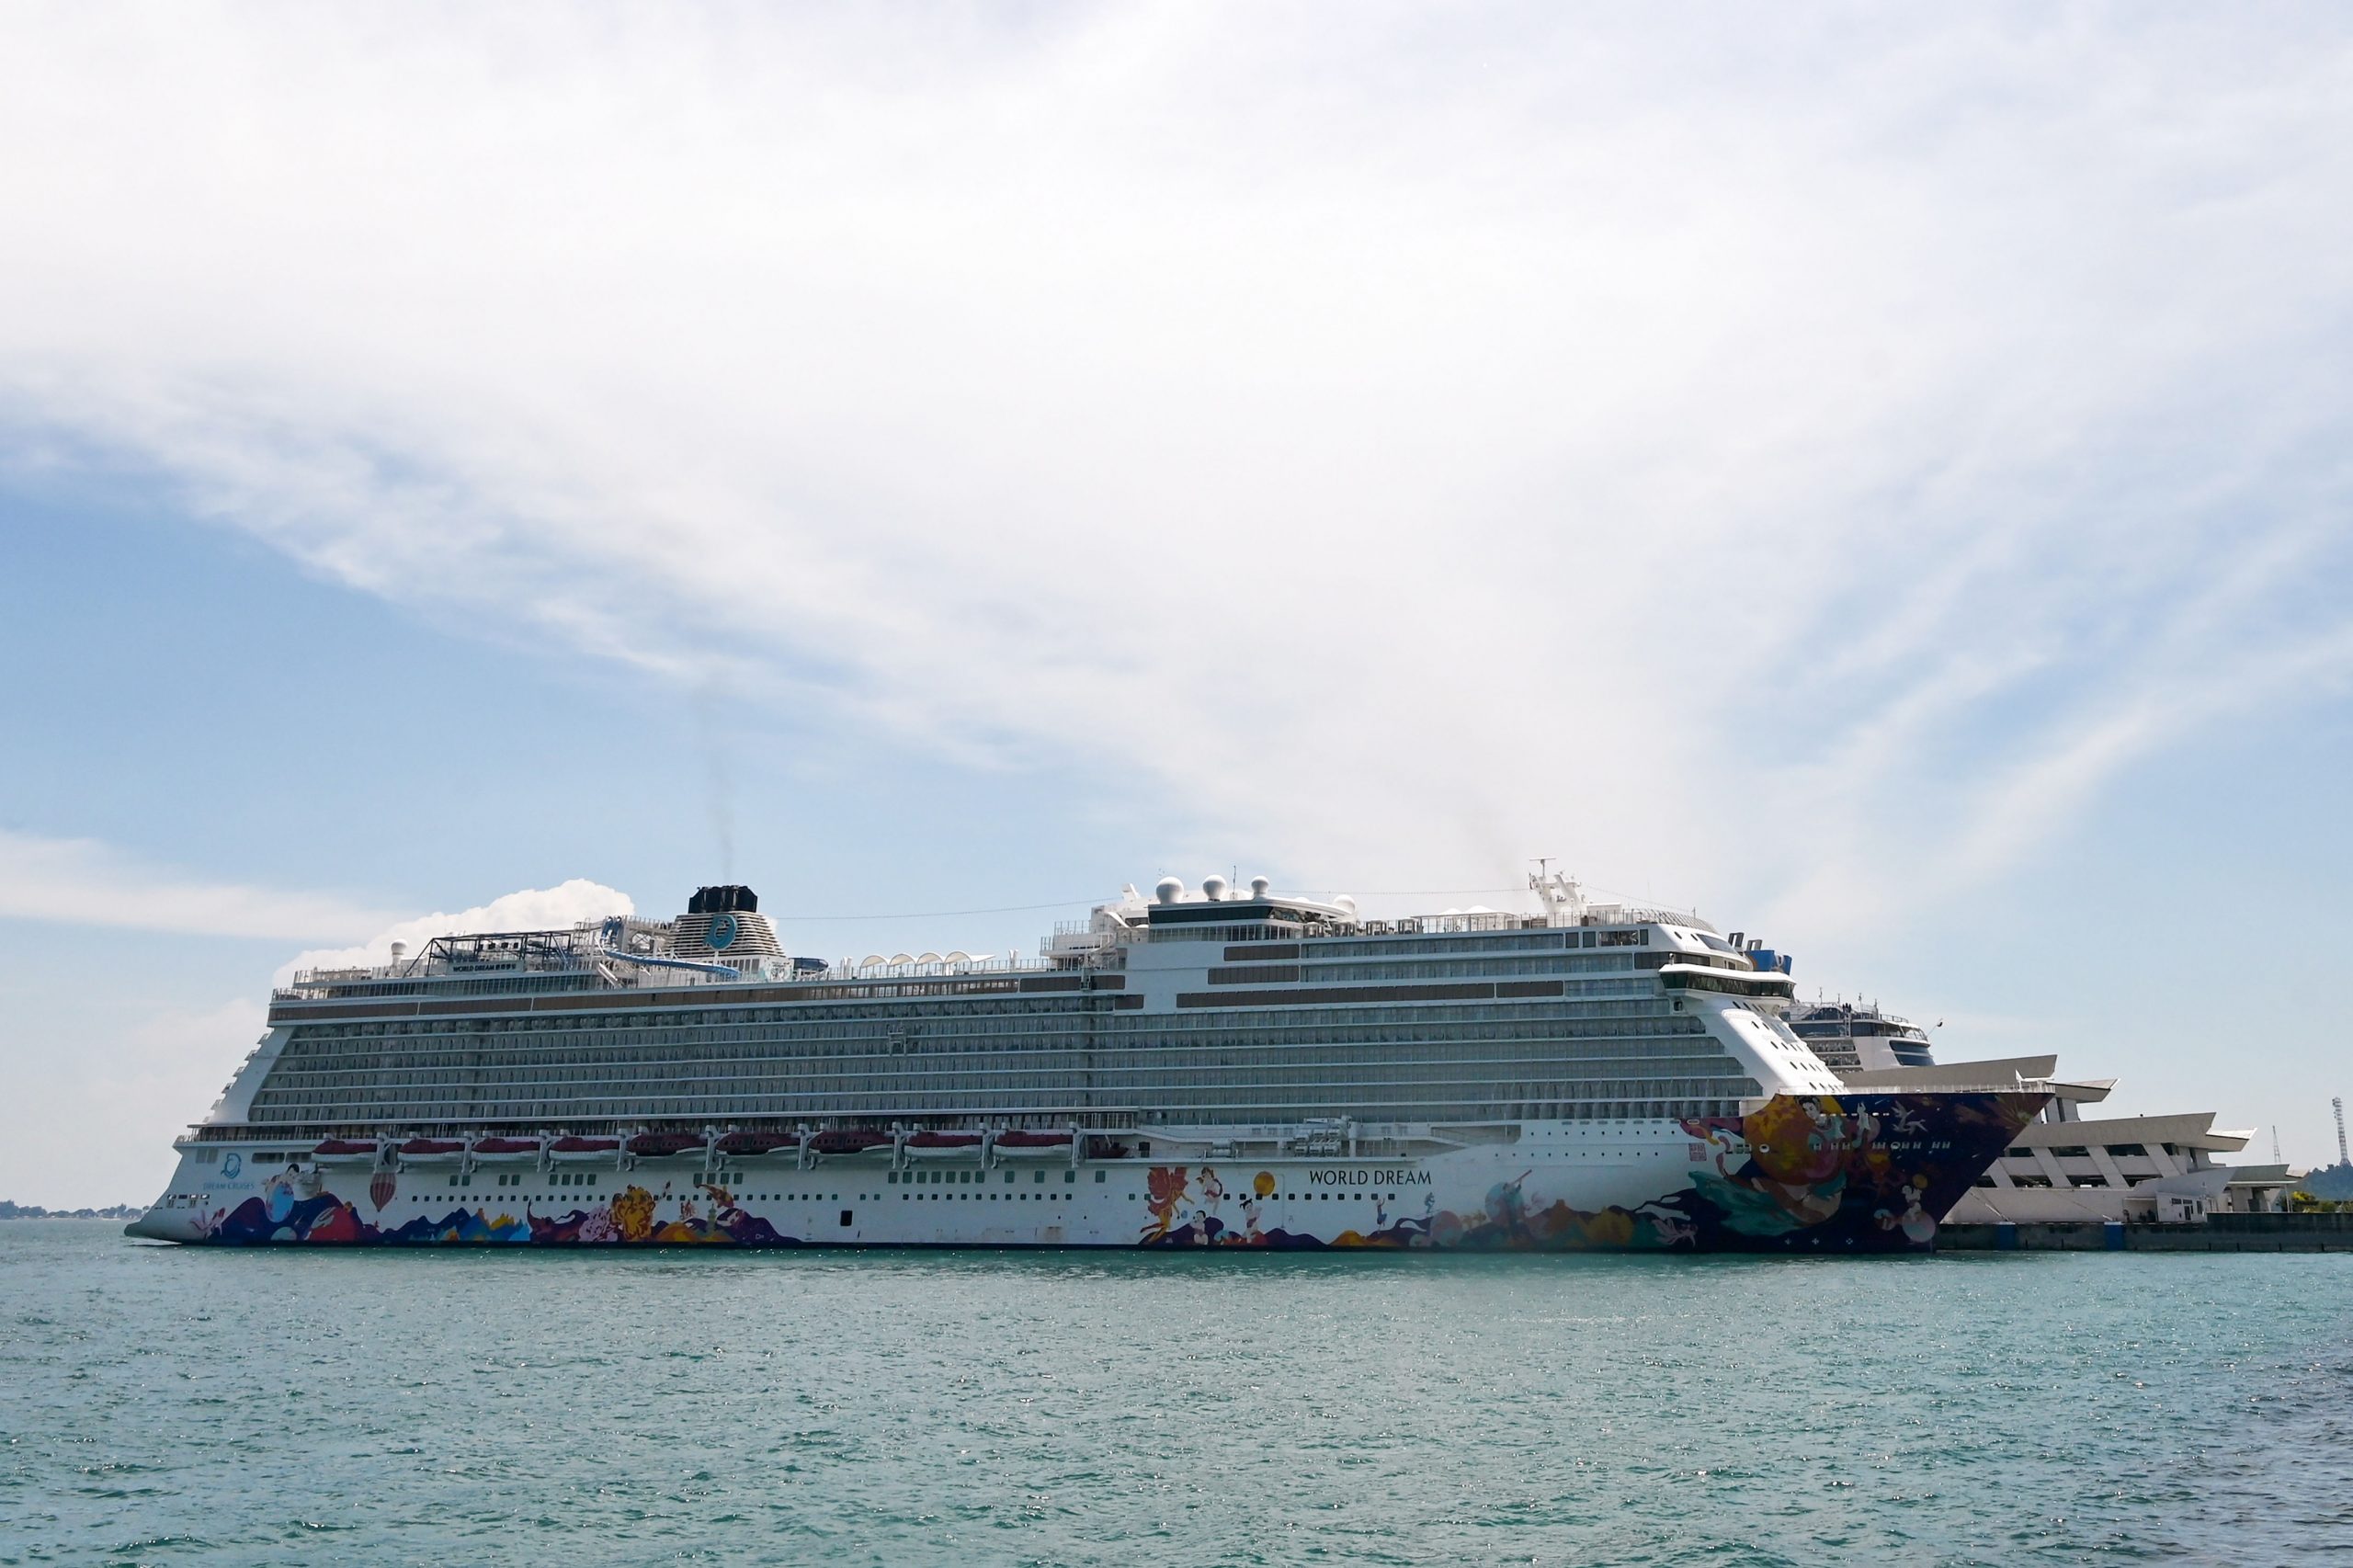 Caribbean cruise to sail with 5,500 on board despite CDCs COVID warning